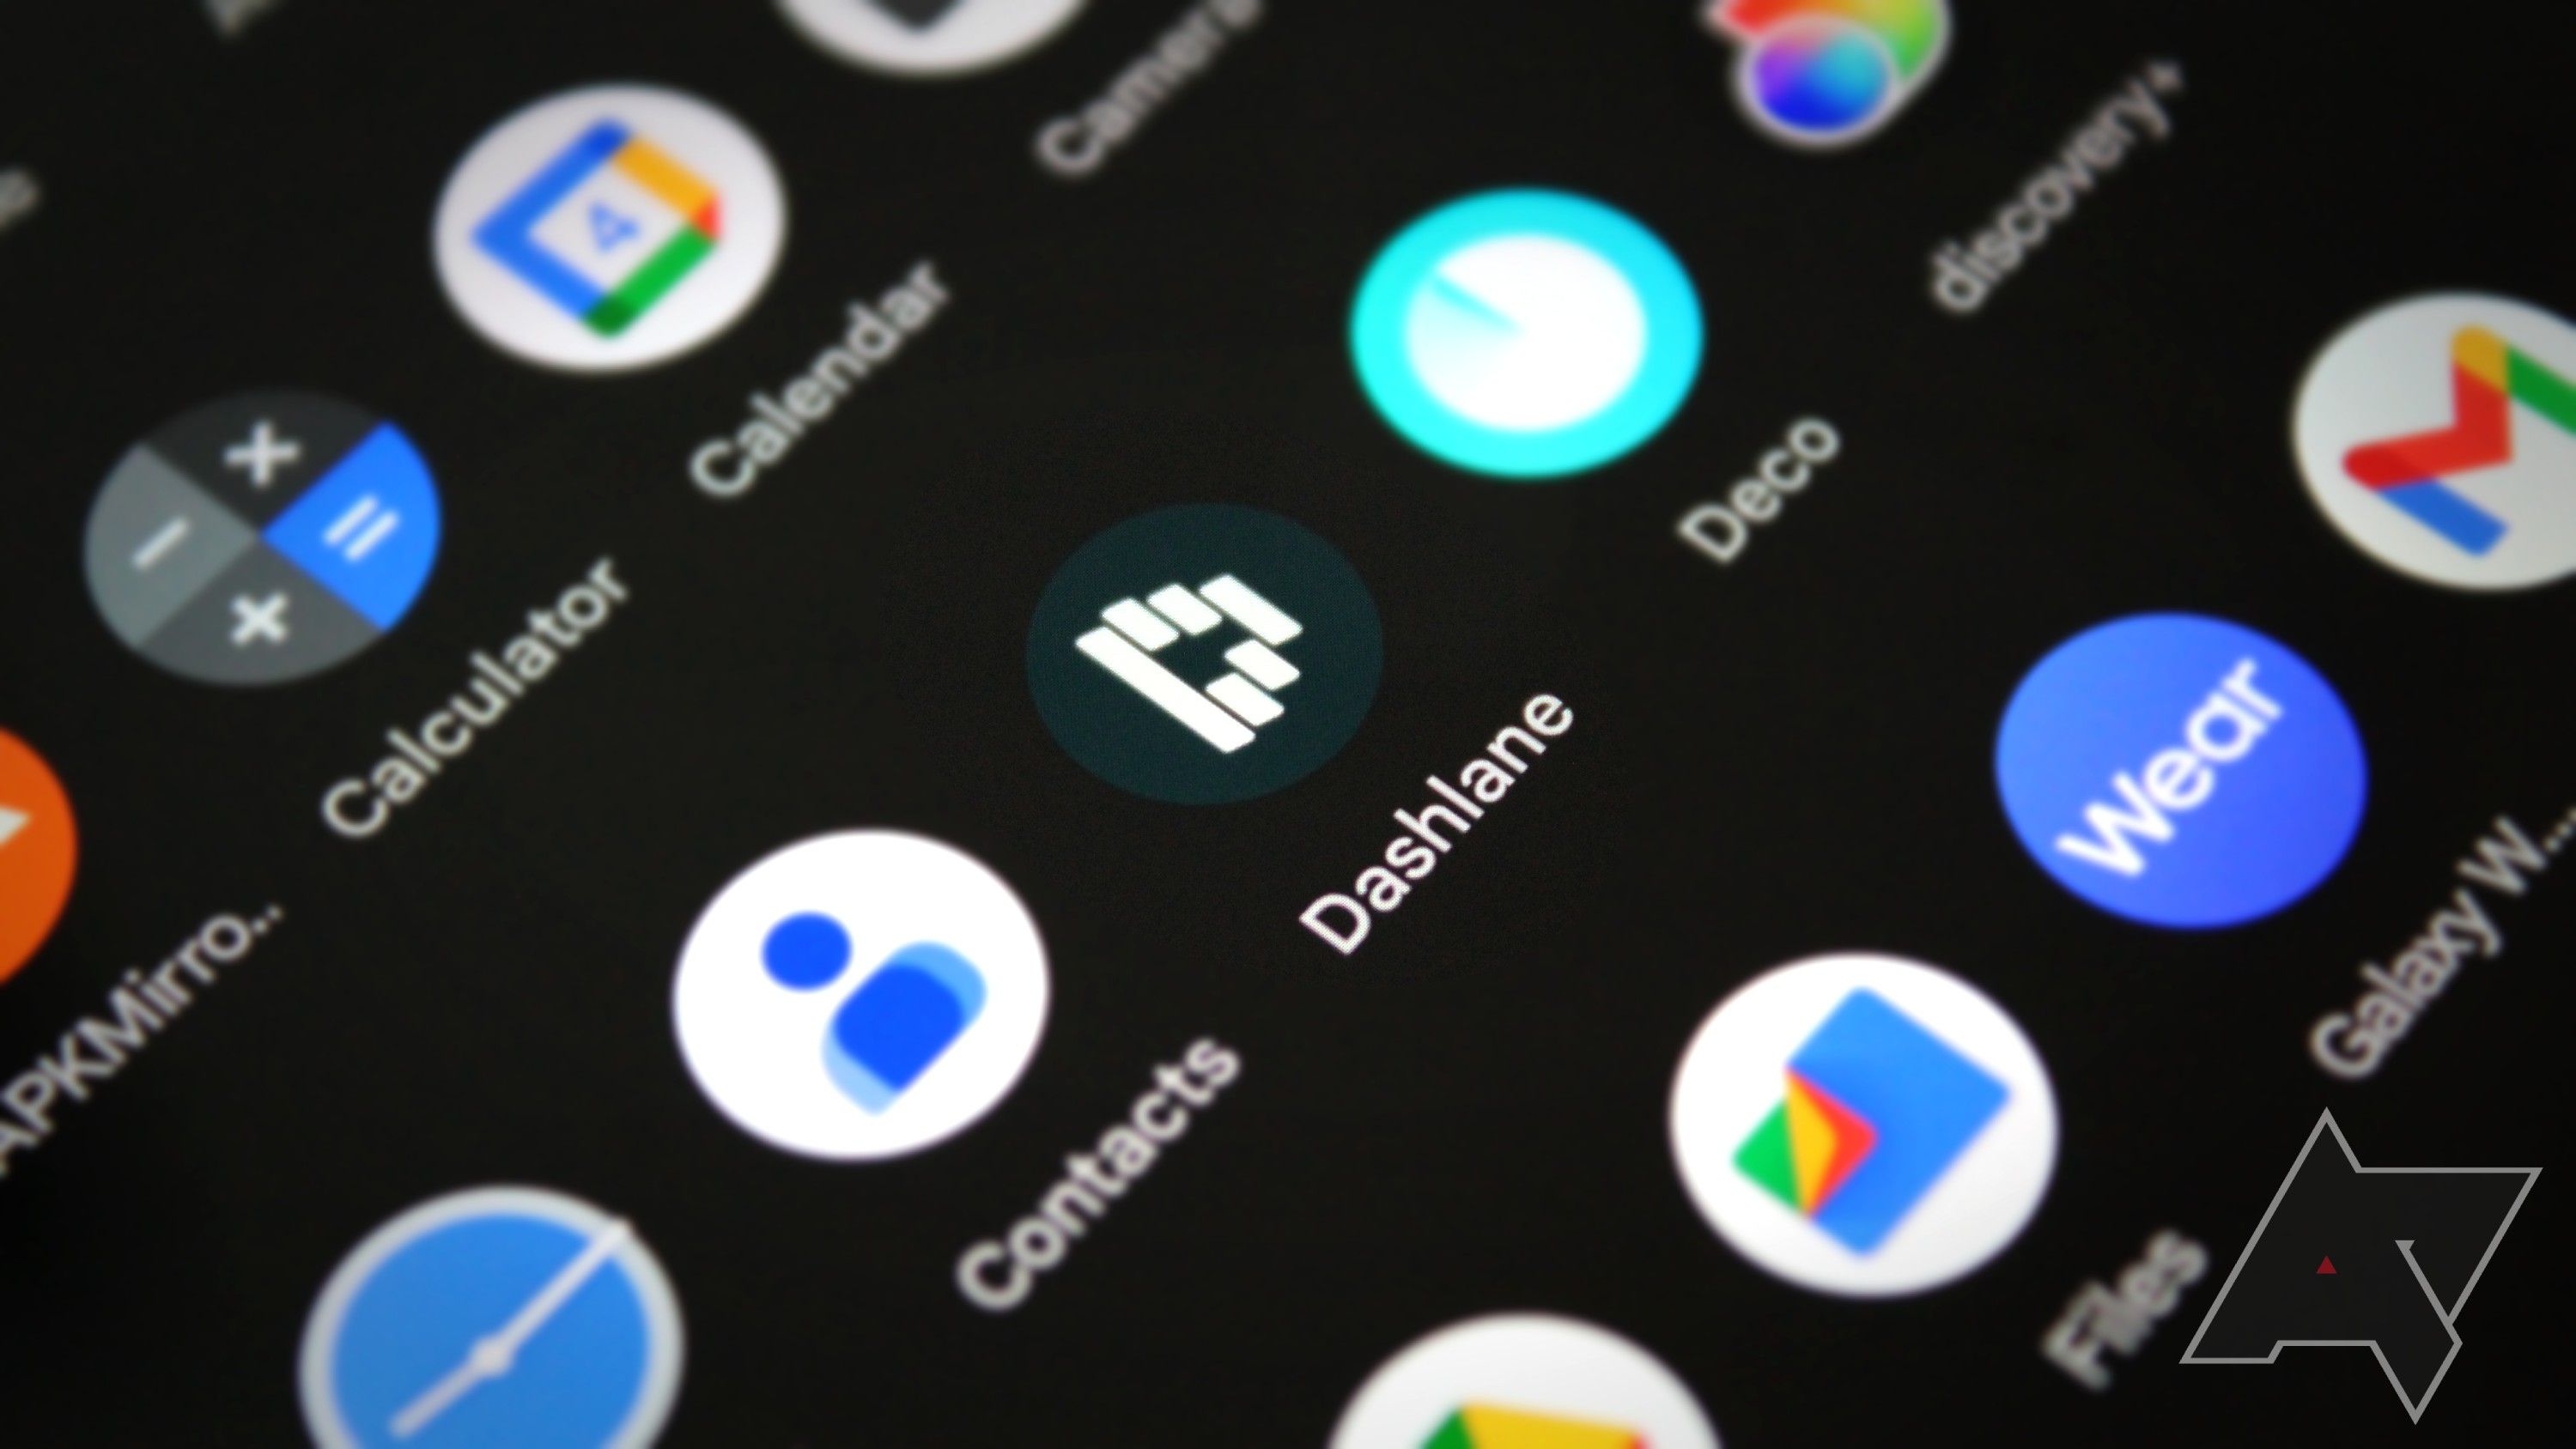 Dashlane mobile app icon surrounded by other blurry icons